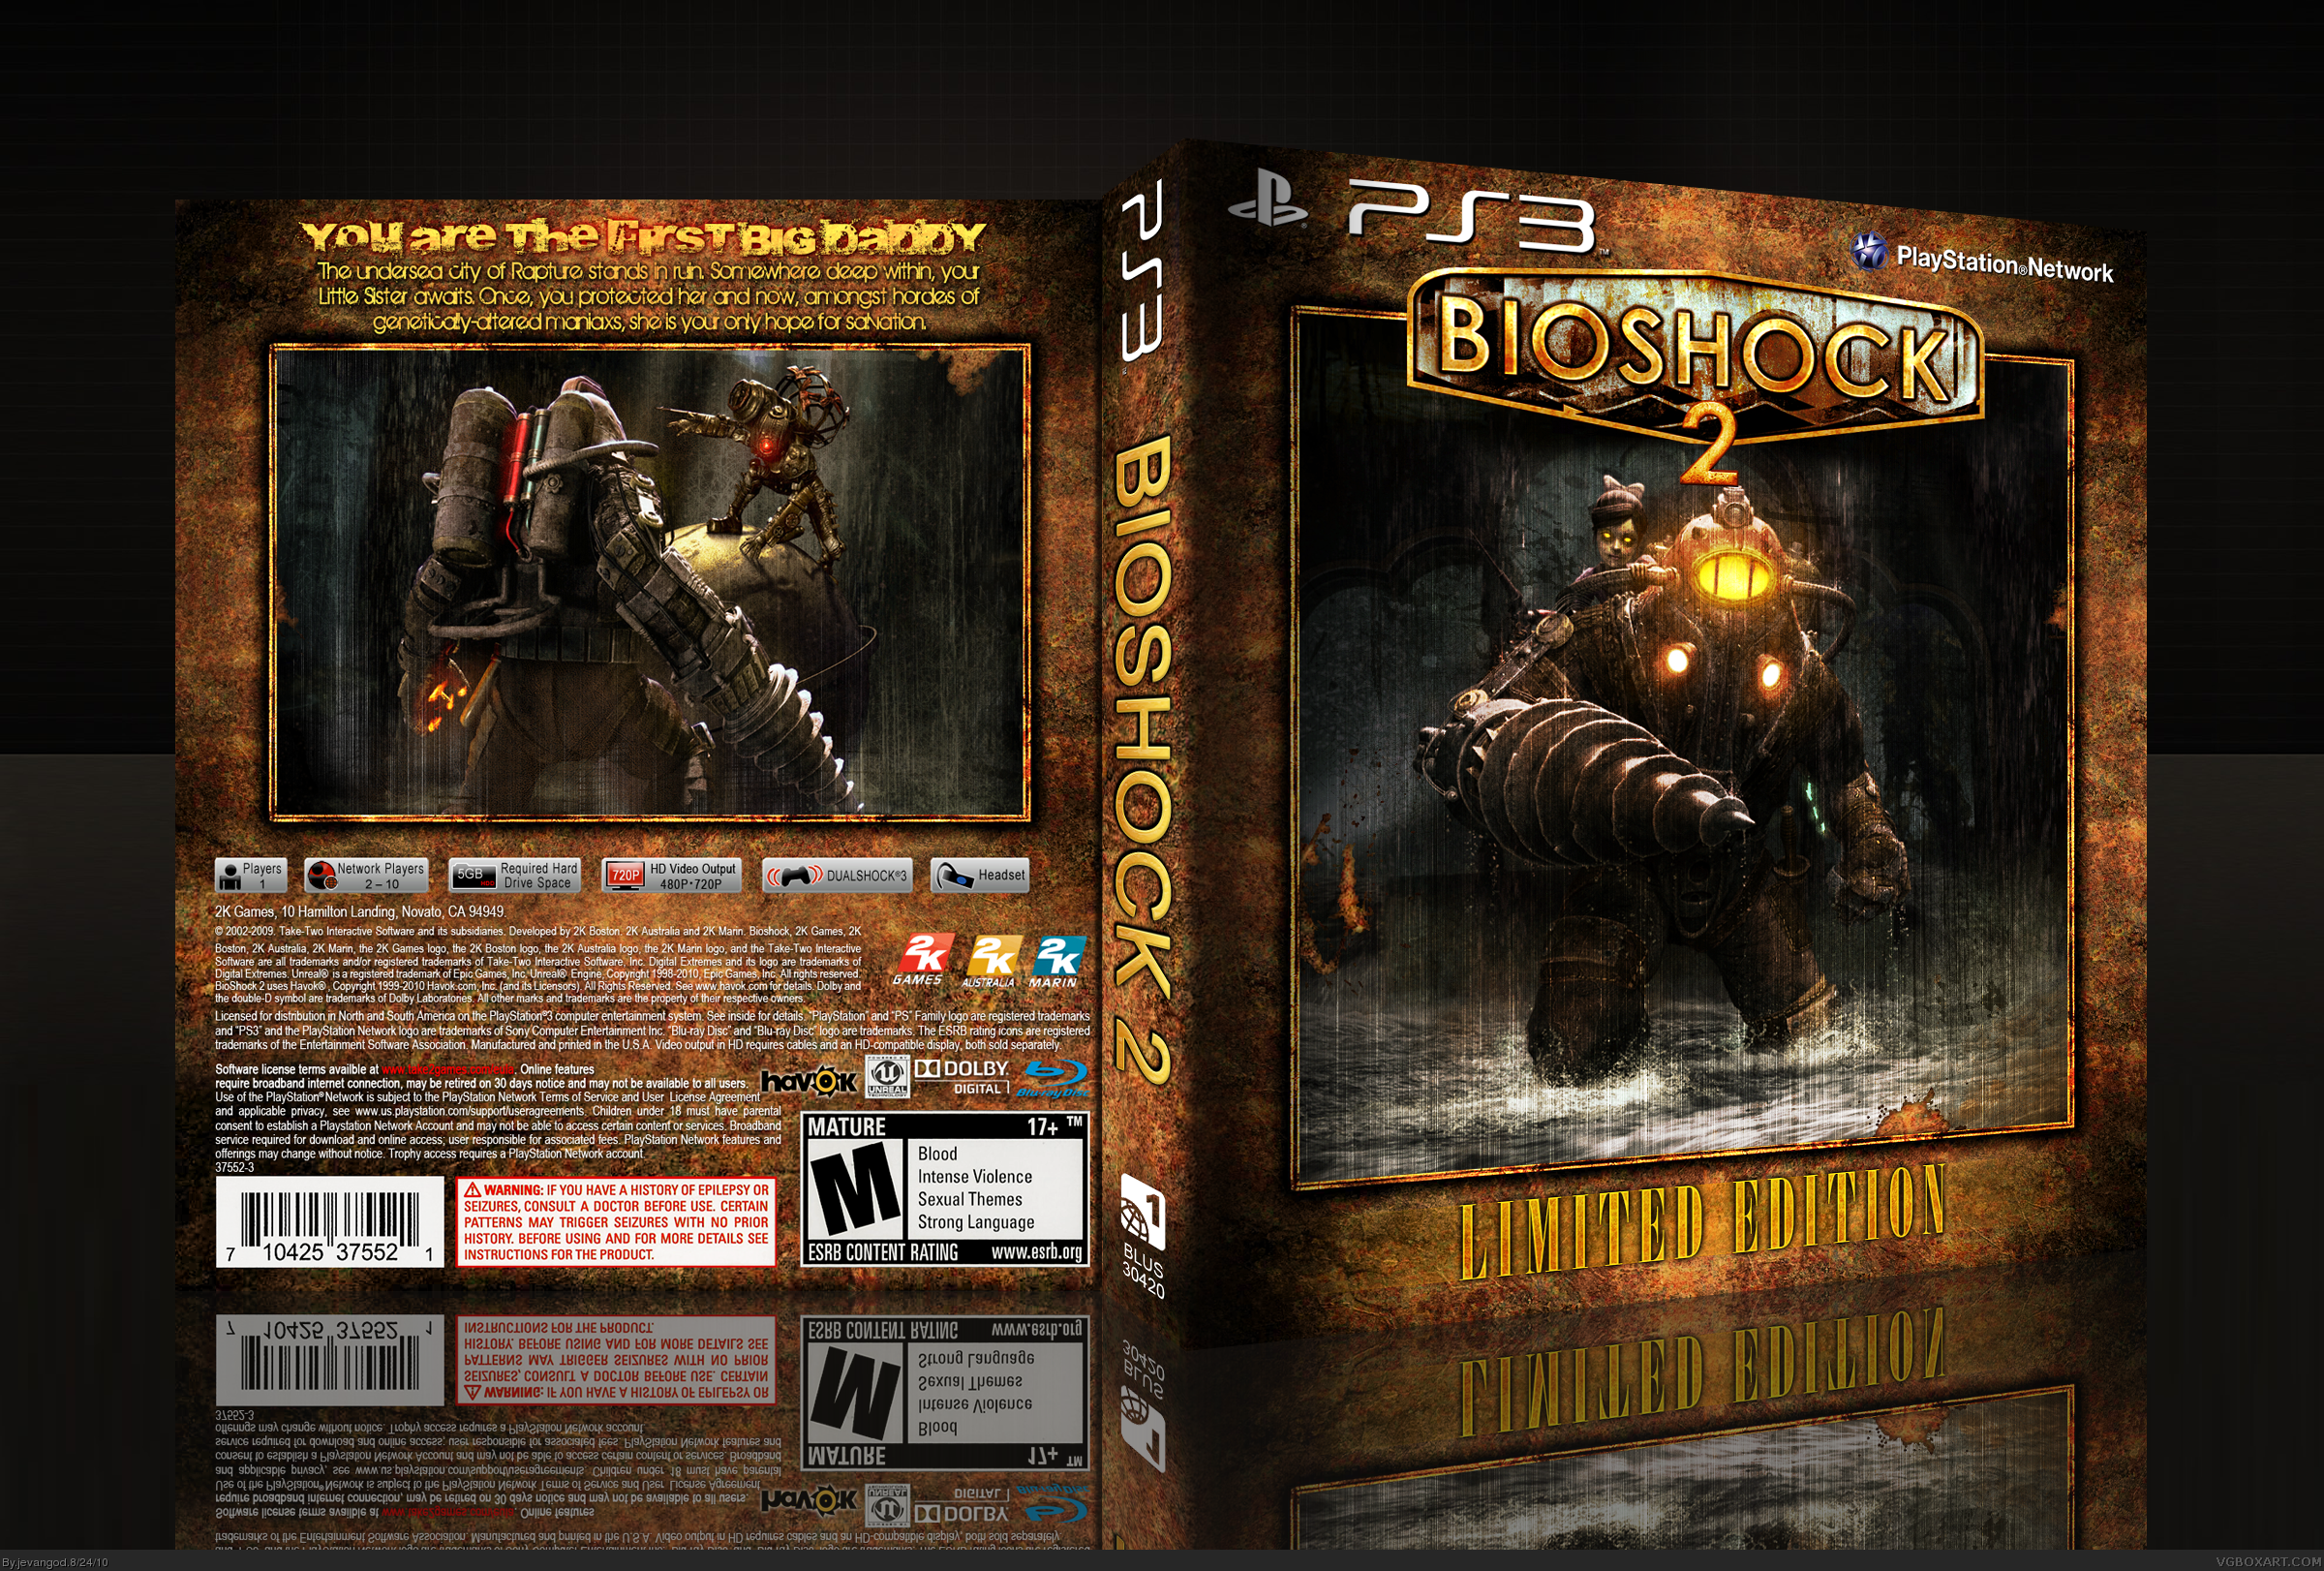 Bioshock 2 Limited Edition box cover